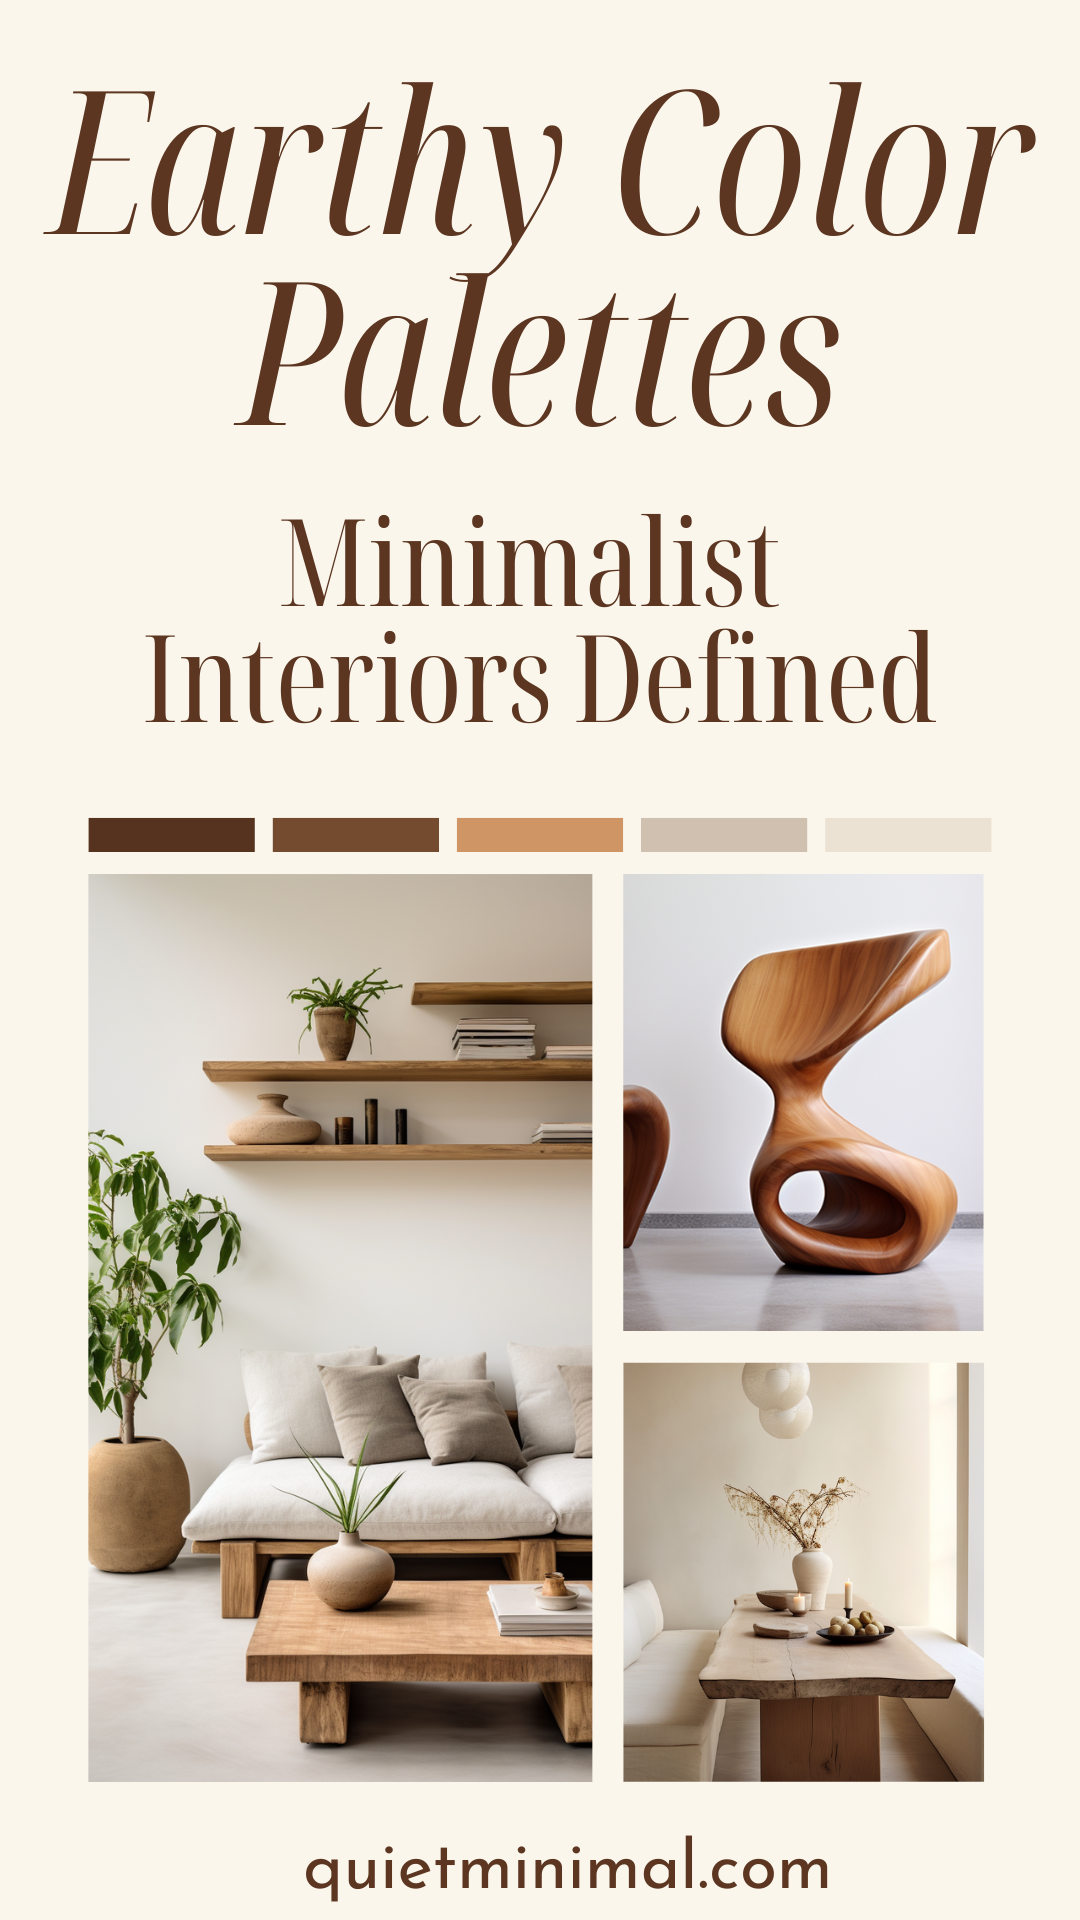 Earthy color palettes minimalist interiors defined.